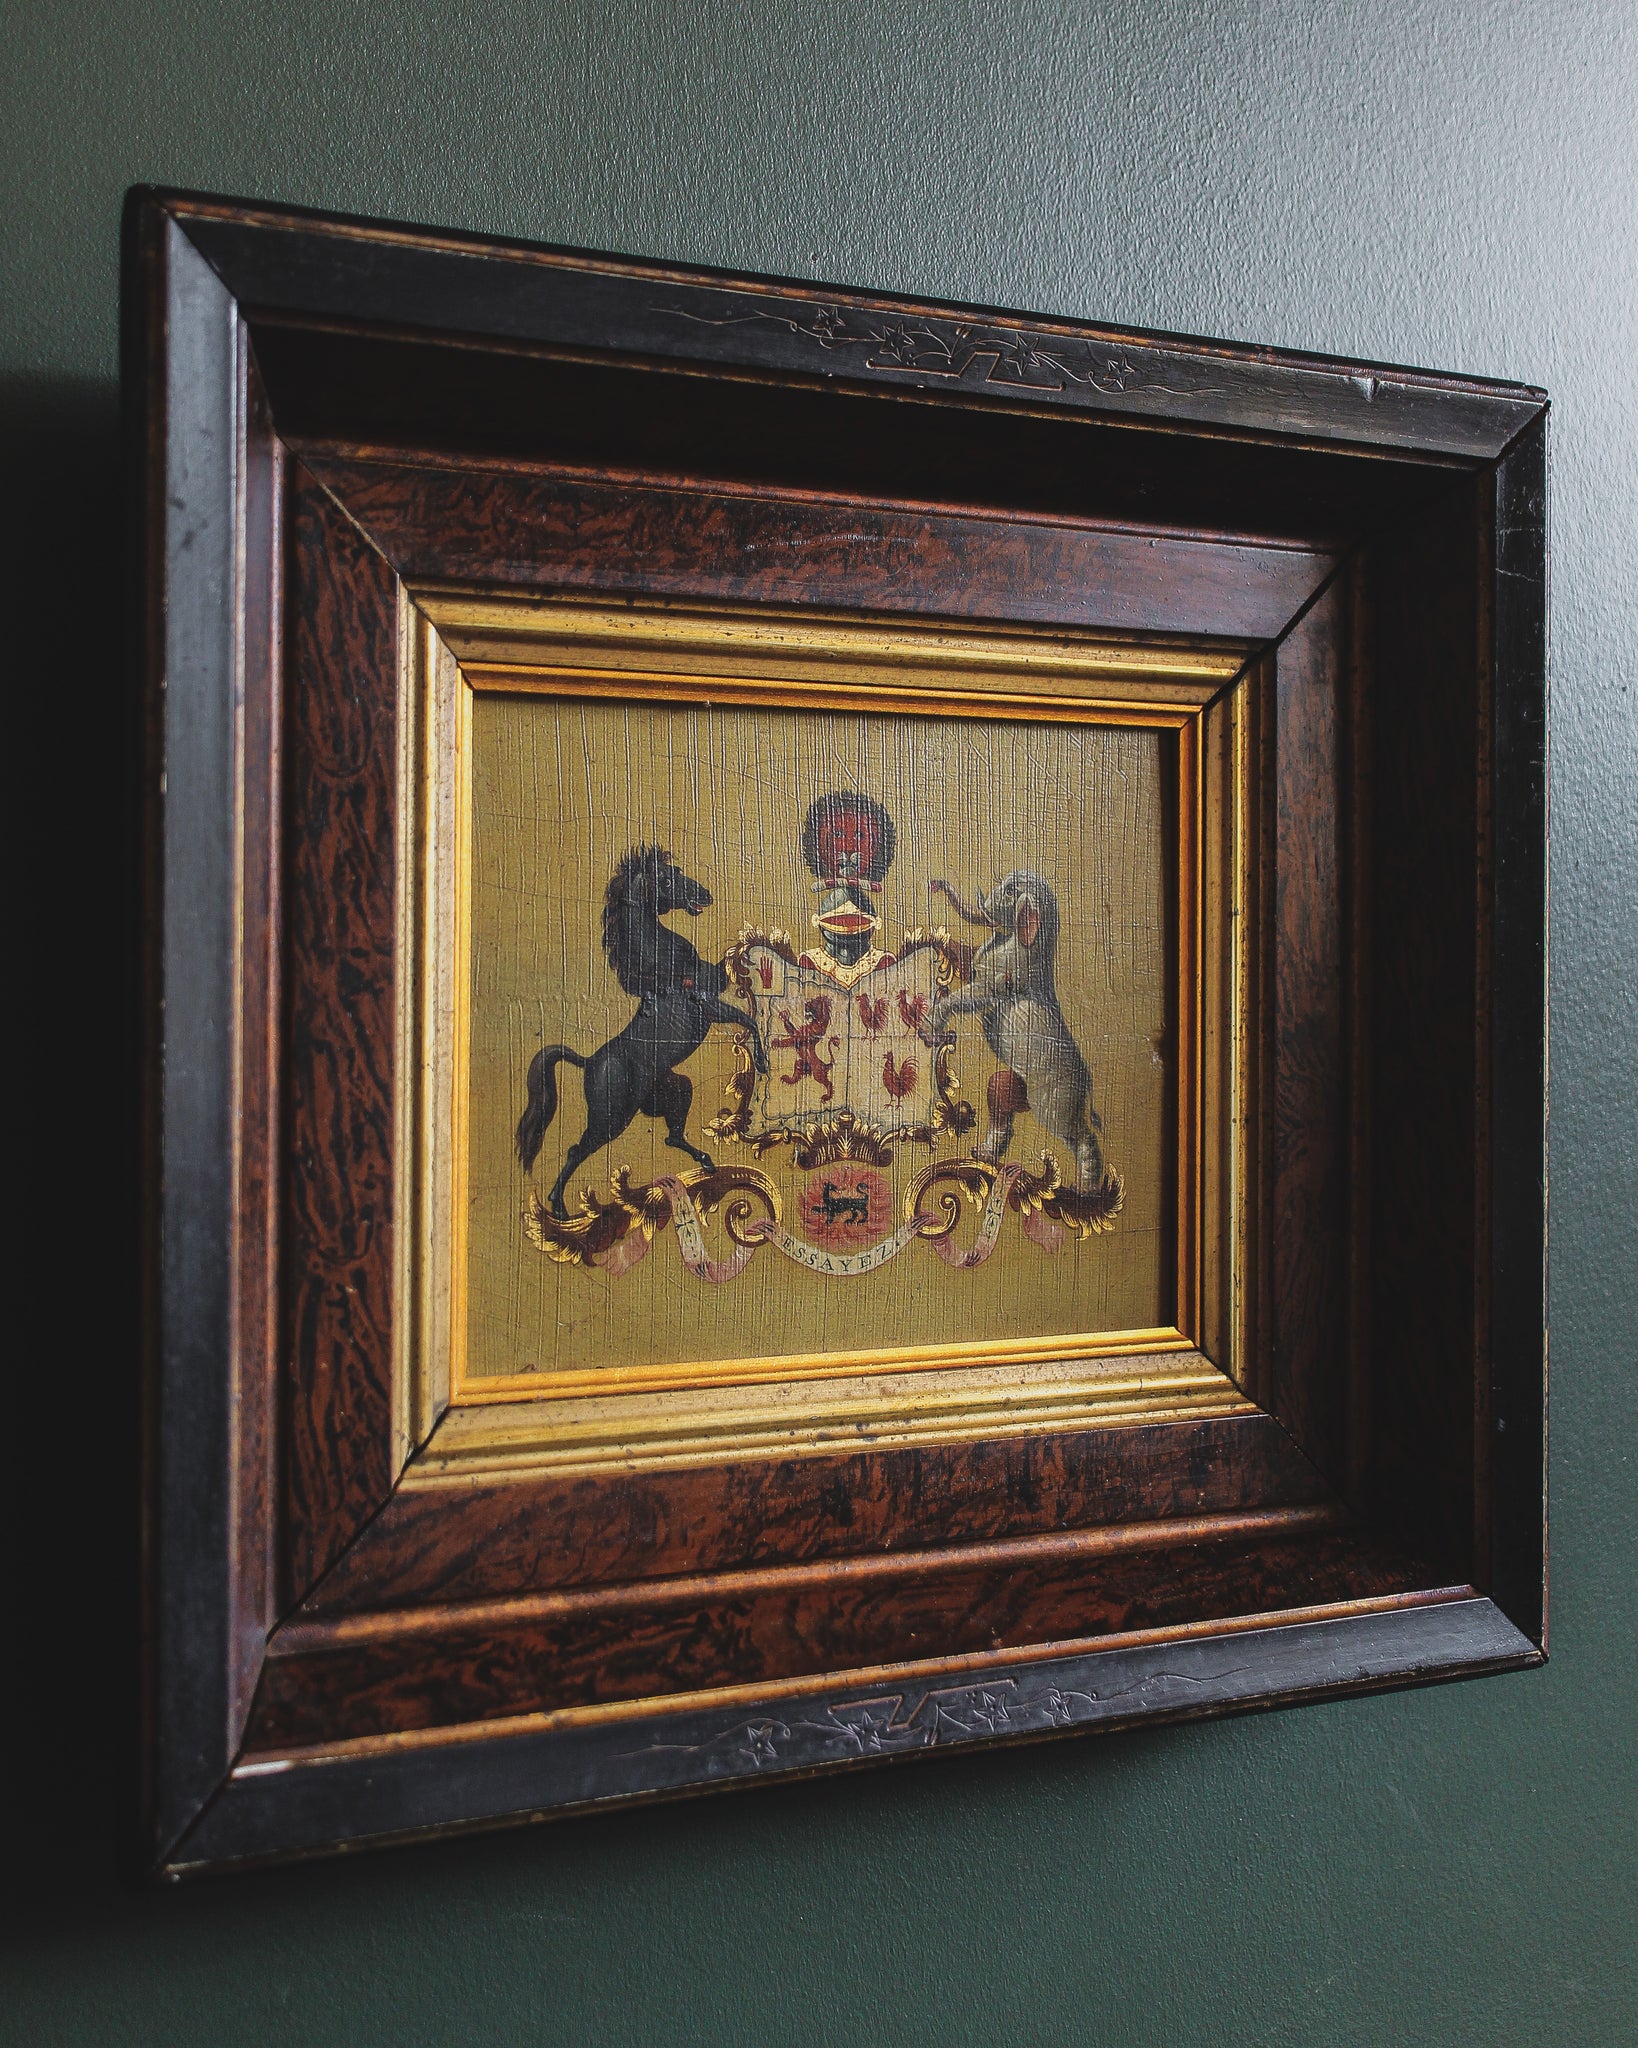 Elephant and Horse Coat of Arms, Oil on Board